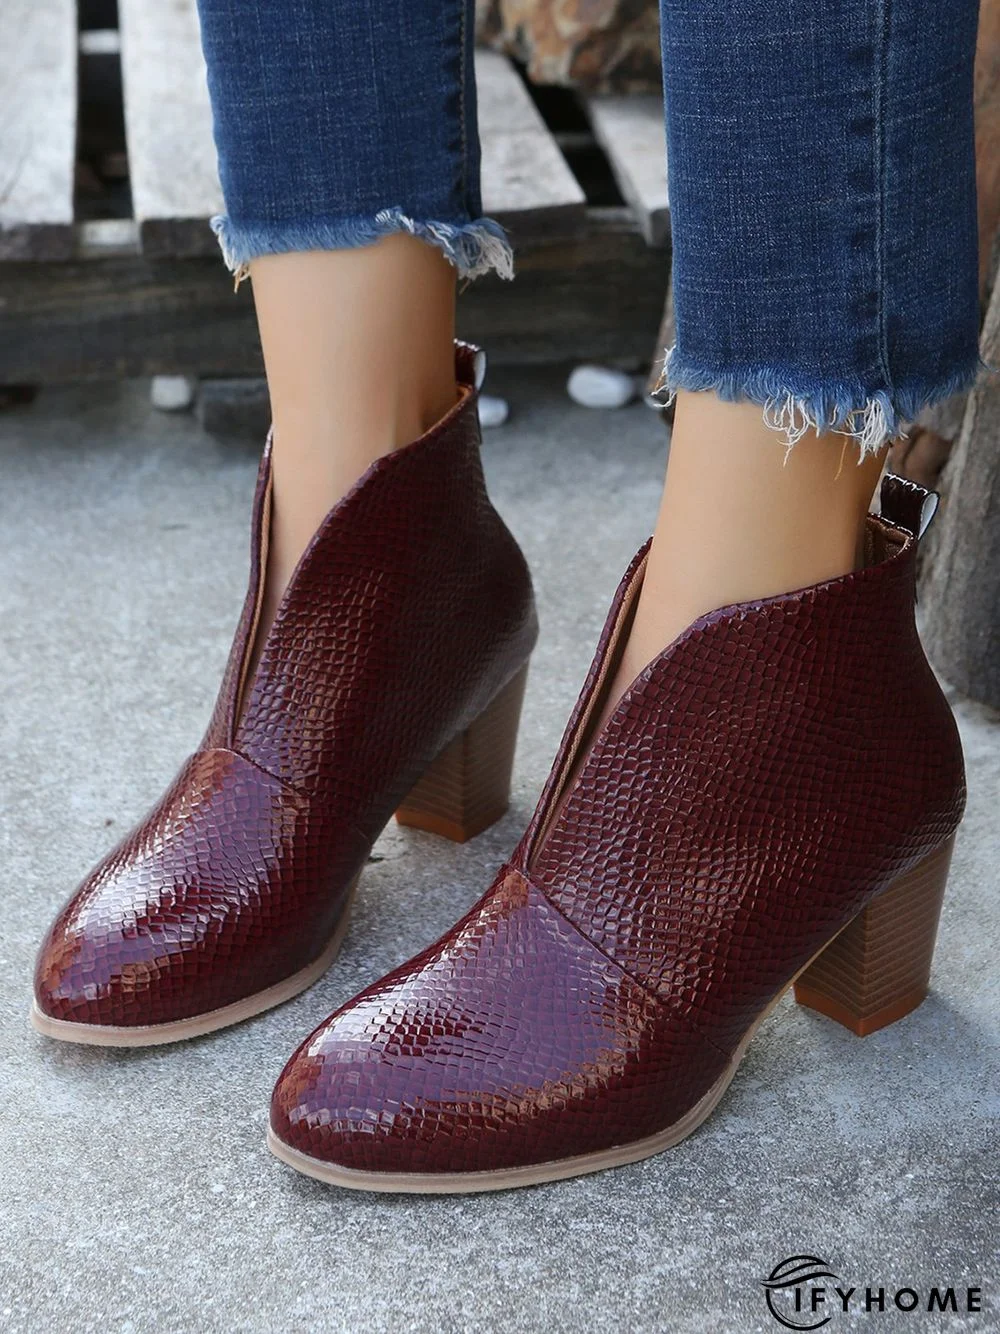 V Toe Cap Wine Red Thick Heel Ankle Boots | IFYHOME